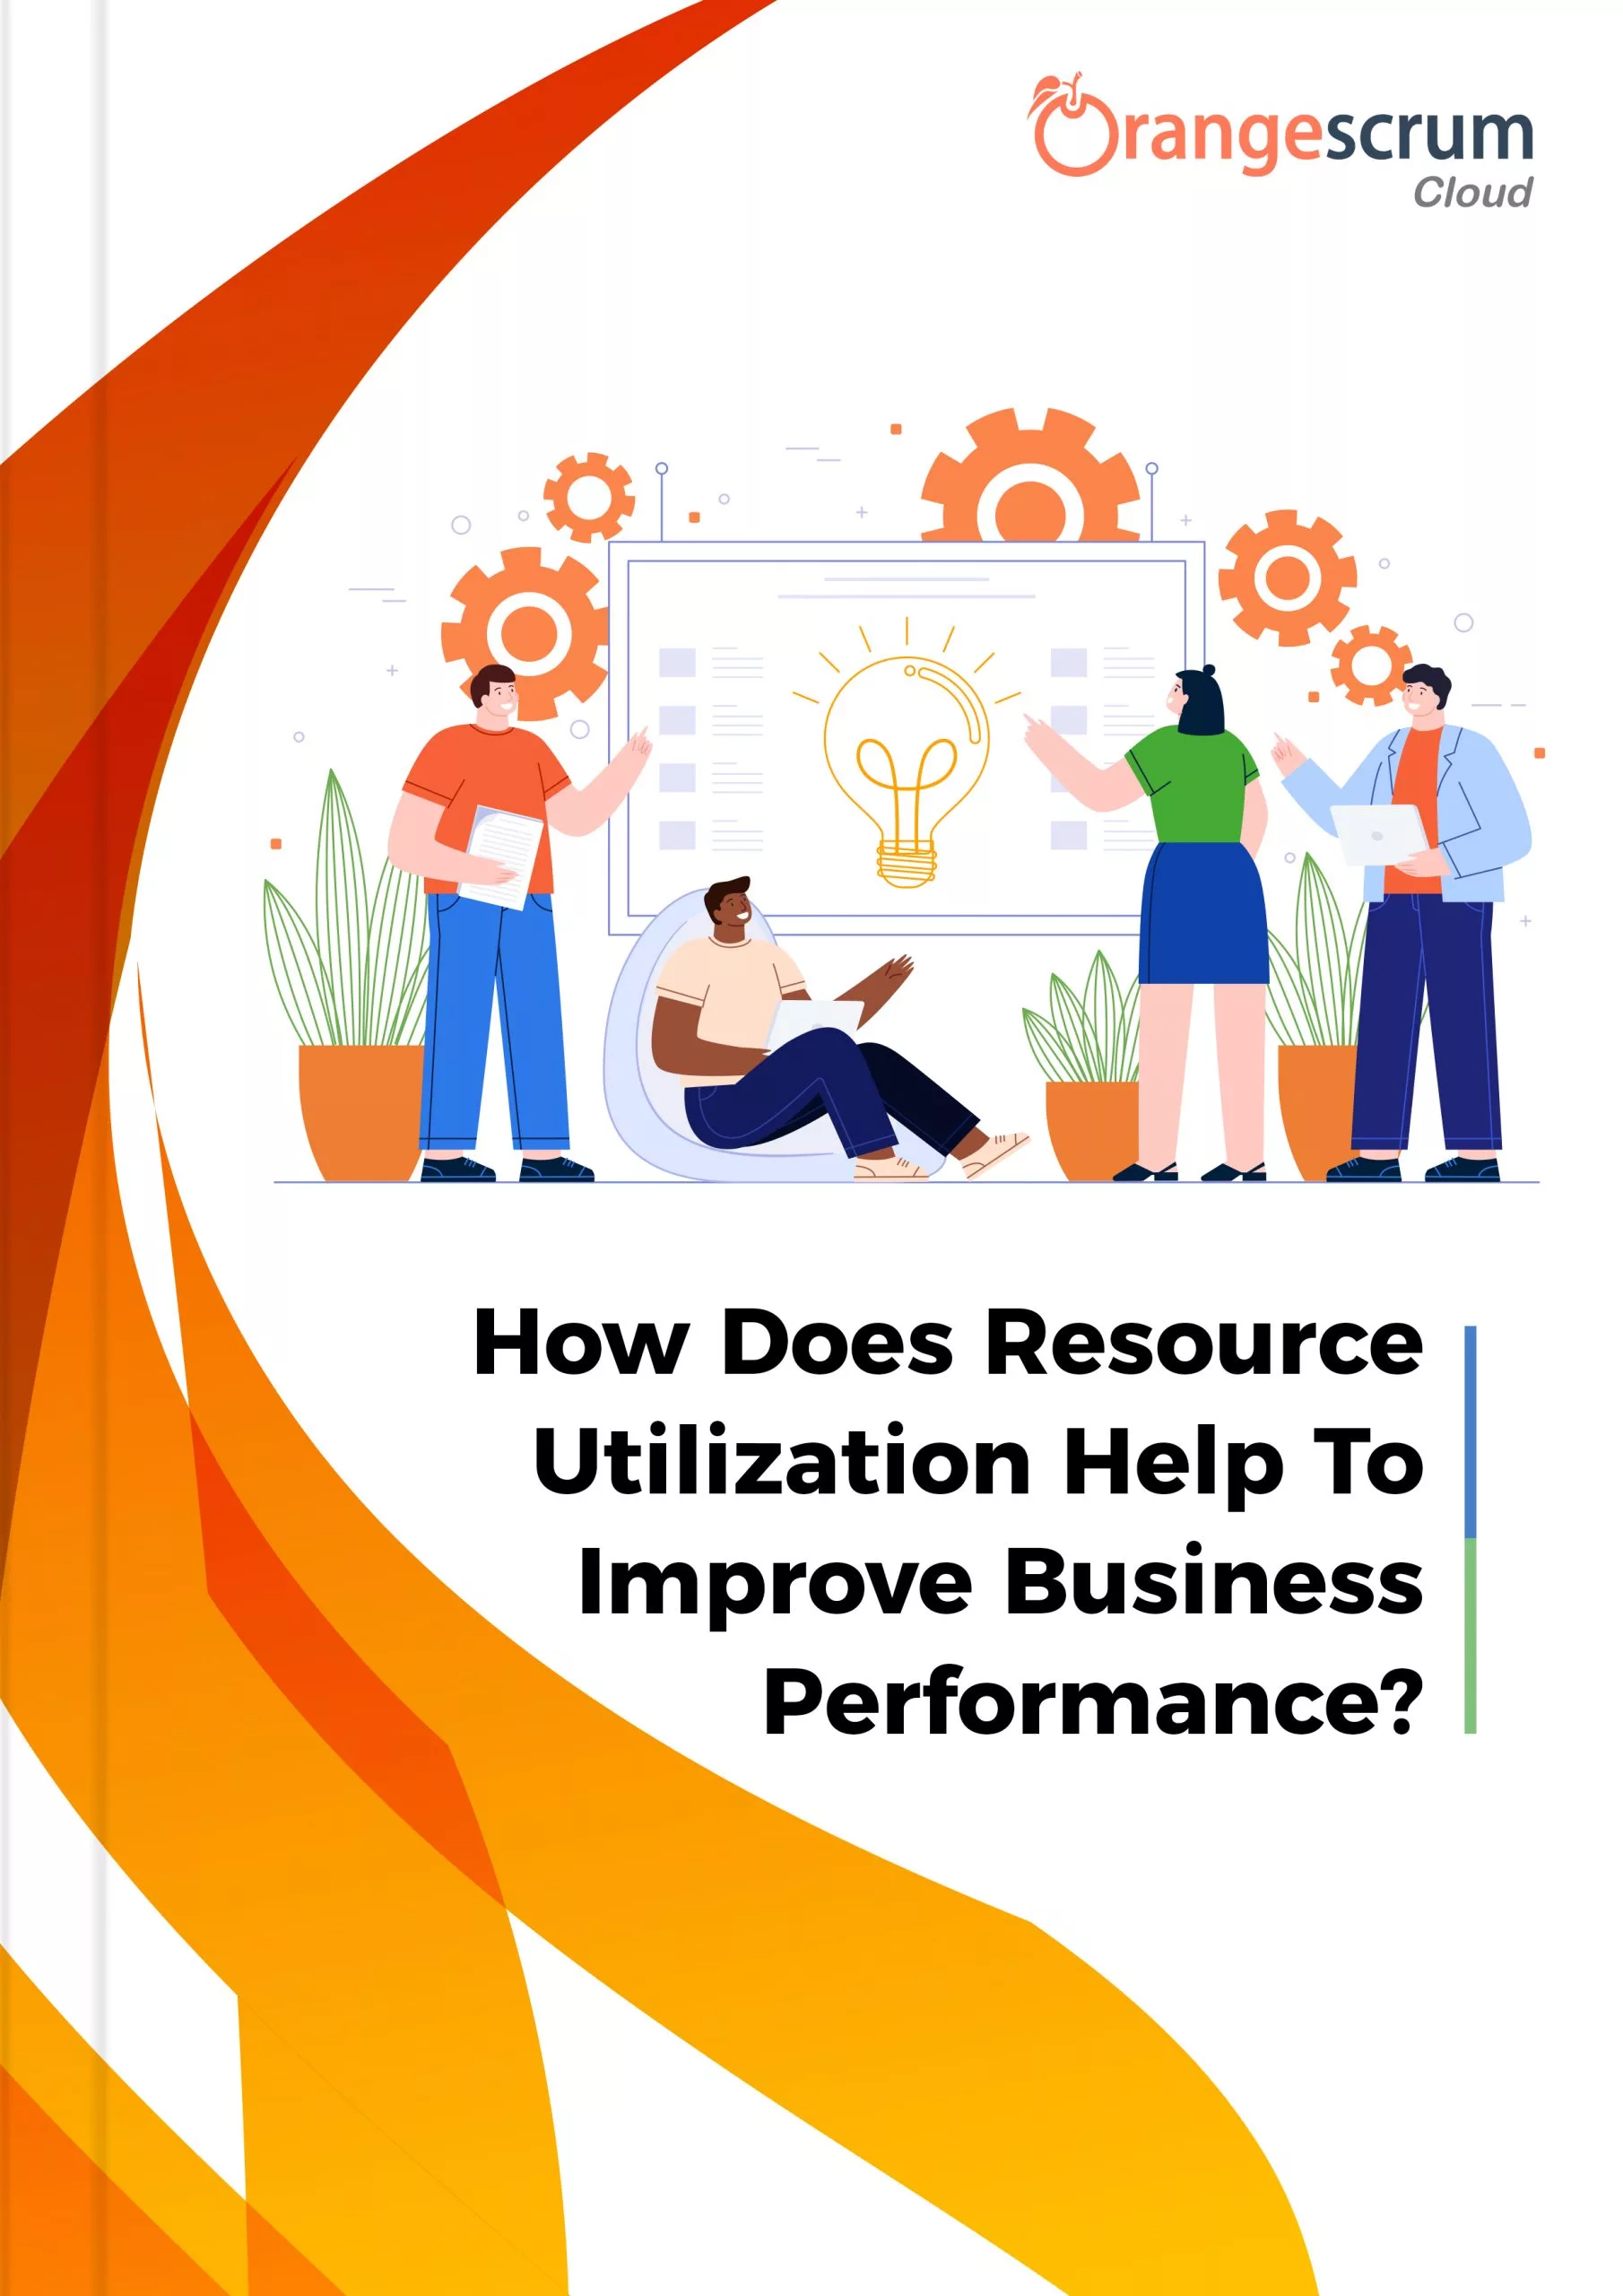 How Does Resource Utilization Help To Improve Business Performance